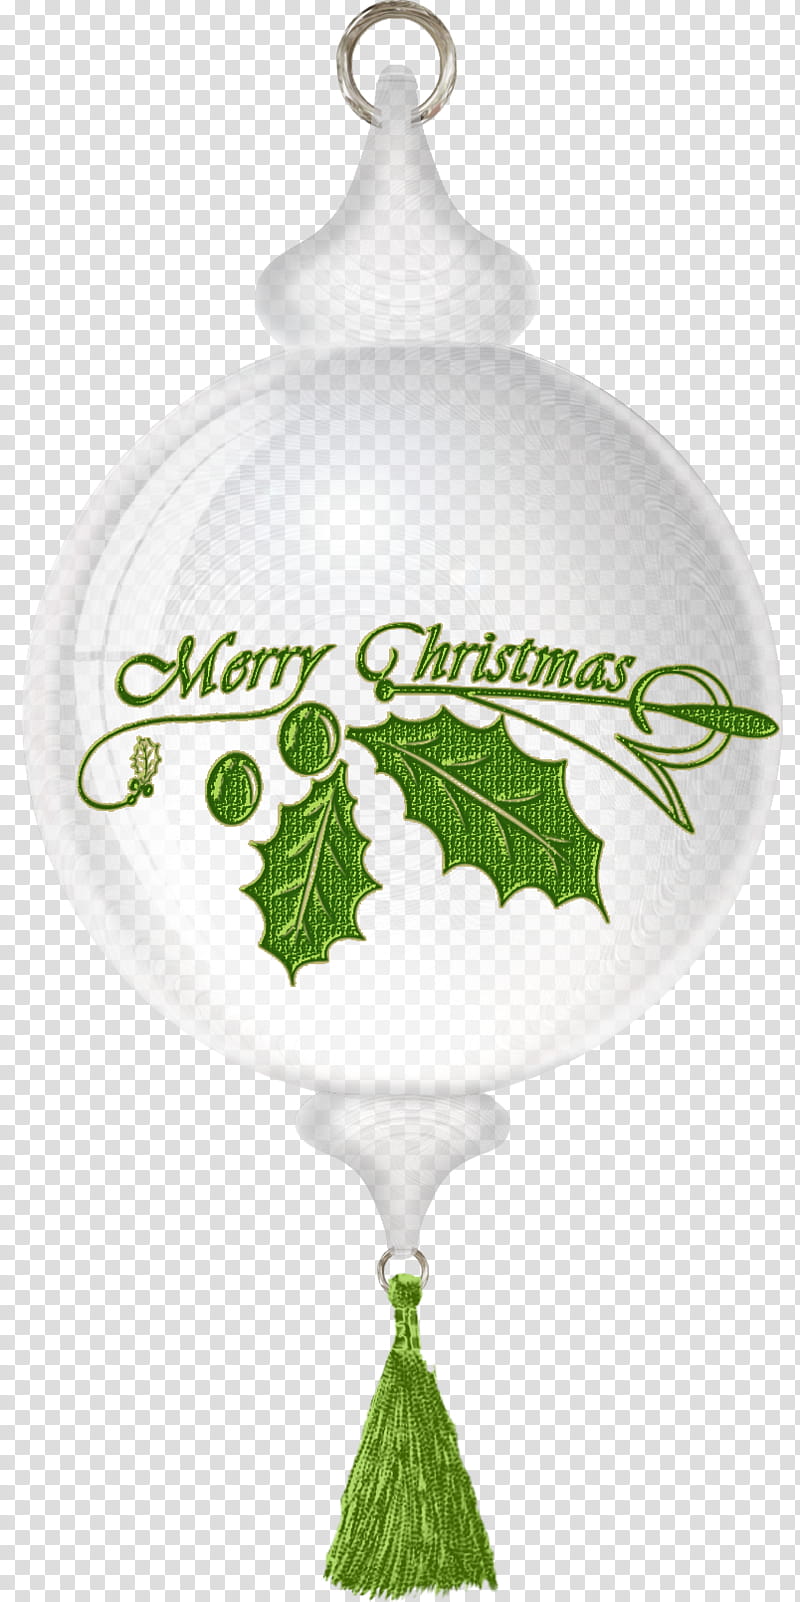 glass Christmas balls, white and green Merry Christmas pendant ornament transparent background PNG clipart